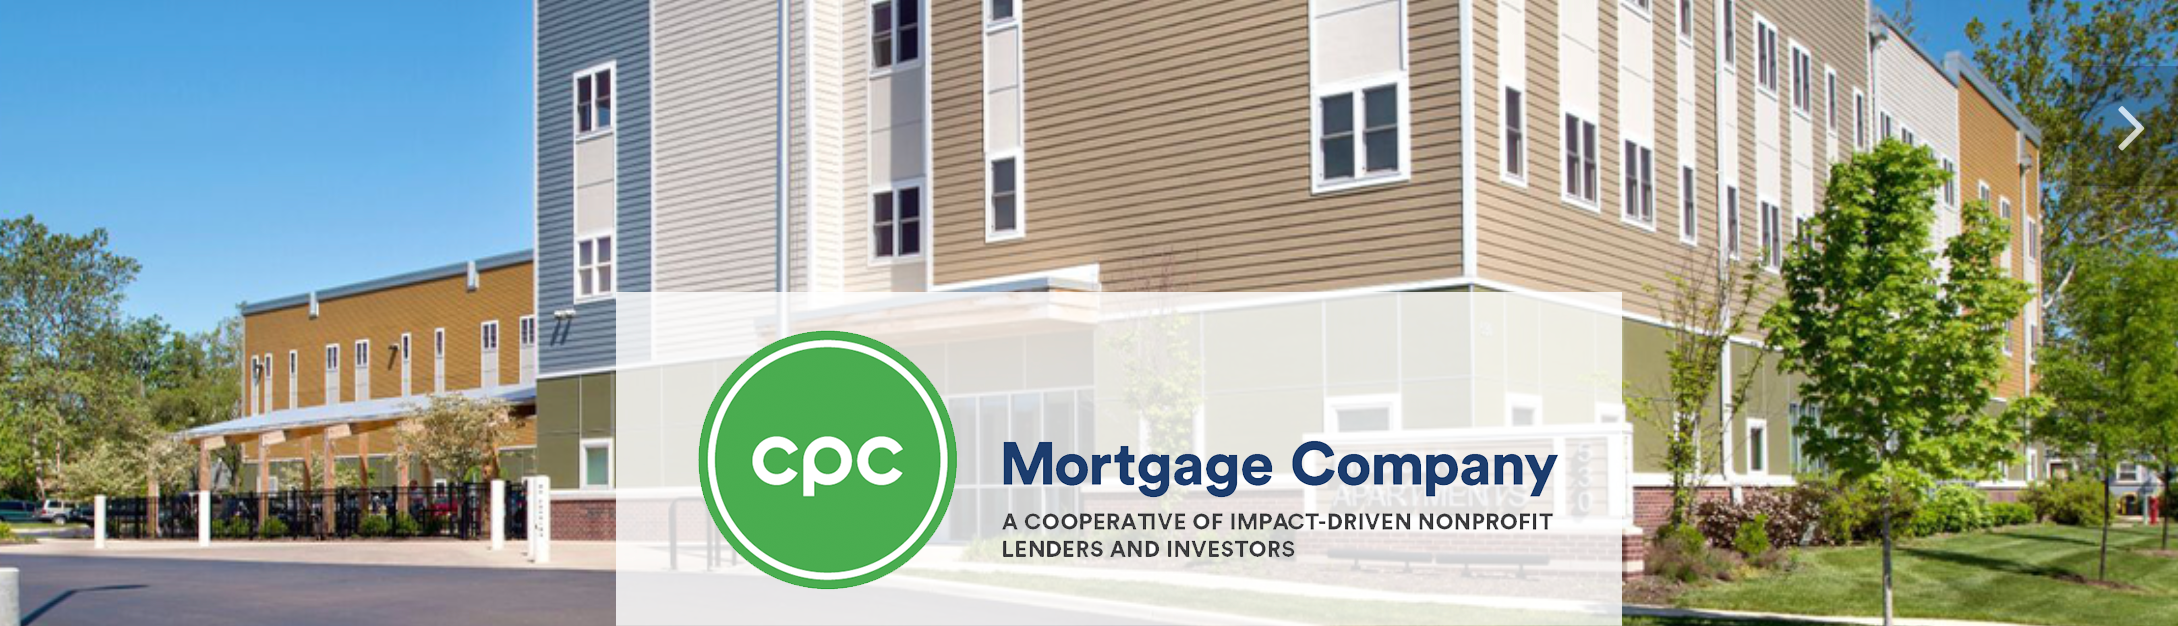 Cinnaire Partners with CPC Mortgage Company and NEF To Form Industry’s Only Impact-Driven Multifamily Mortgage Lender